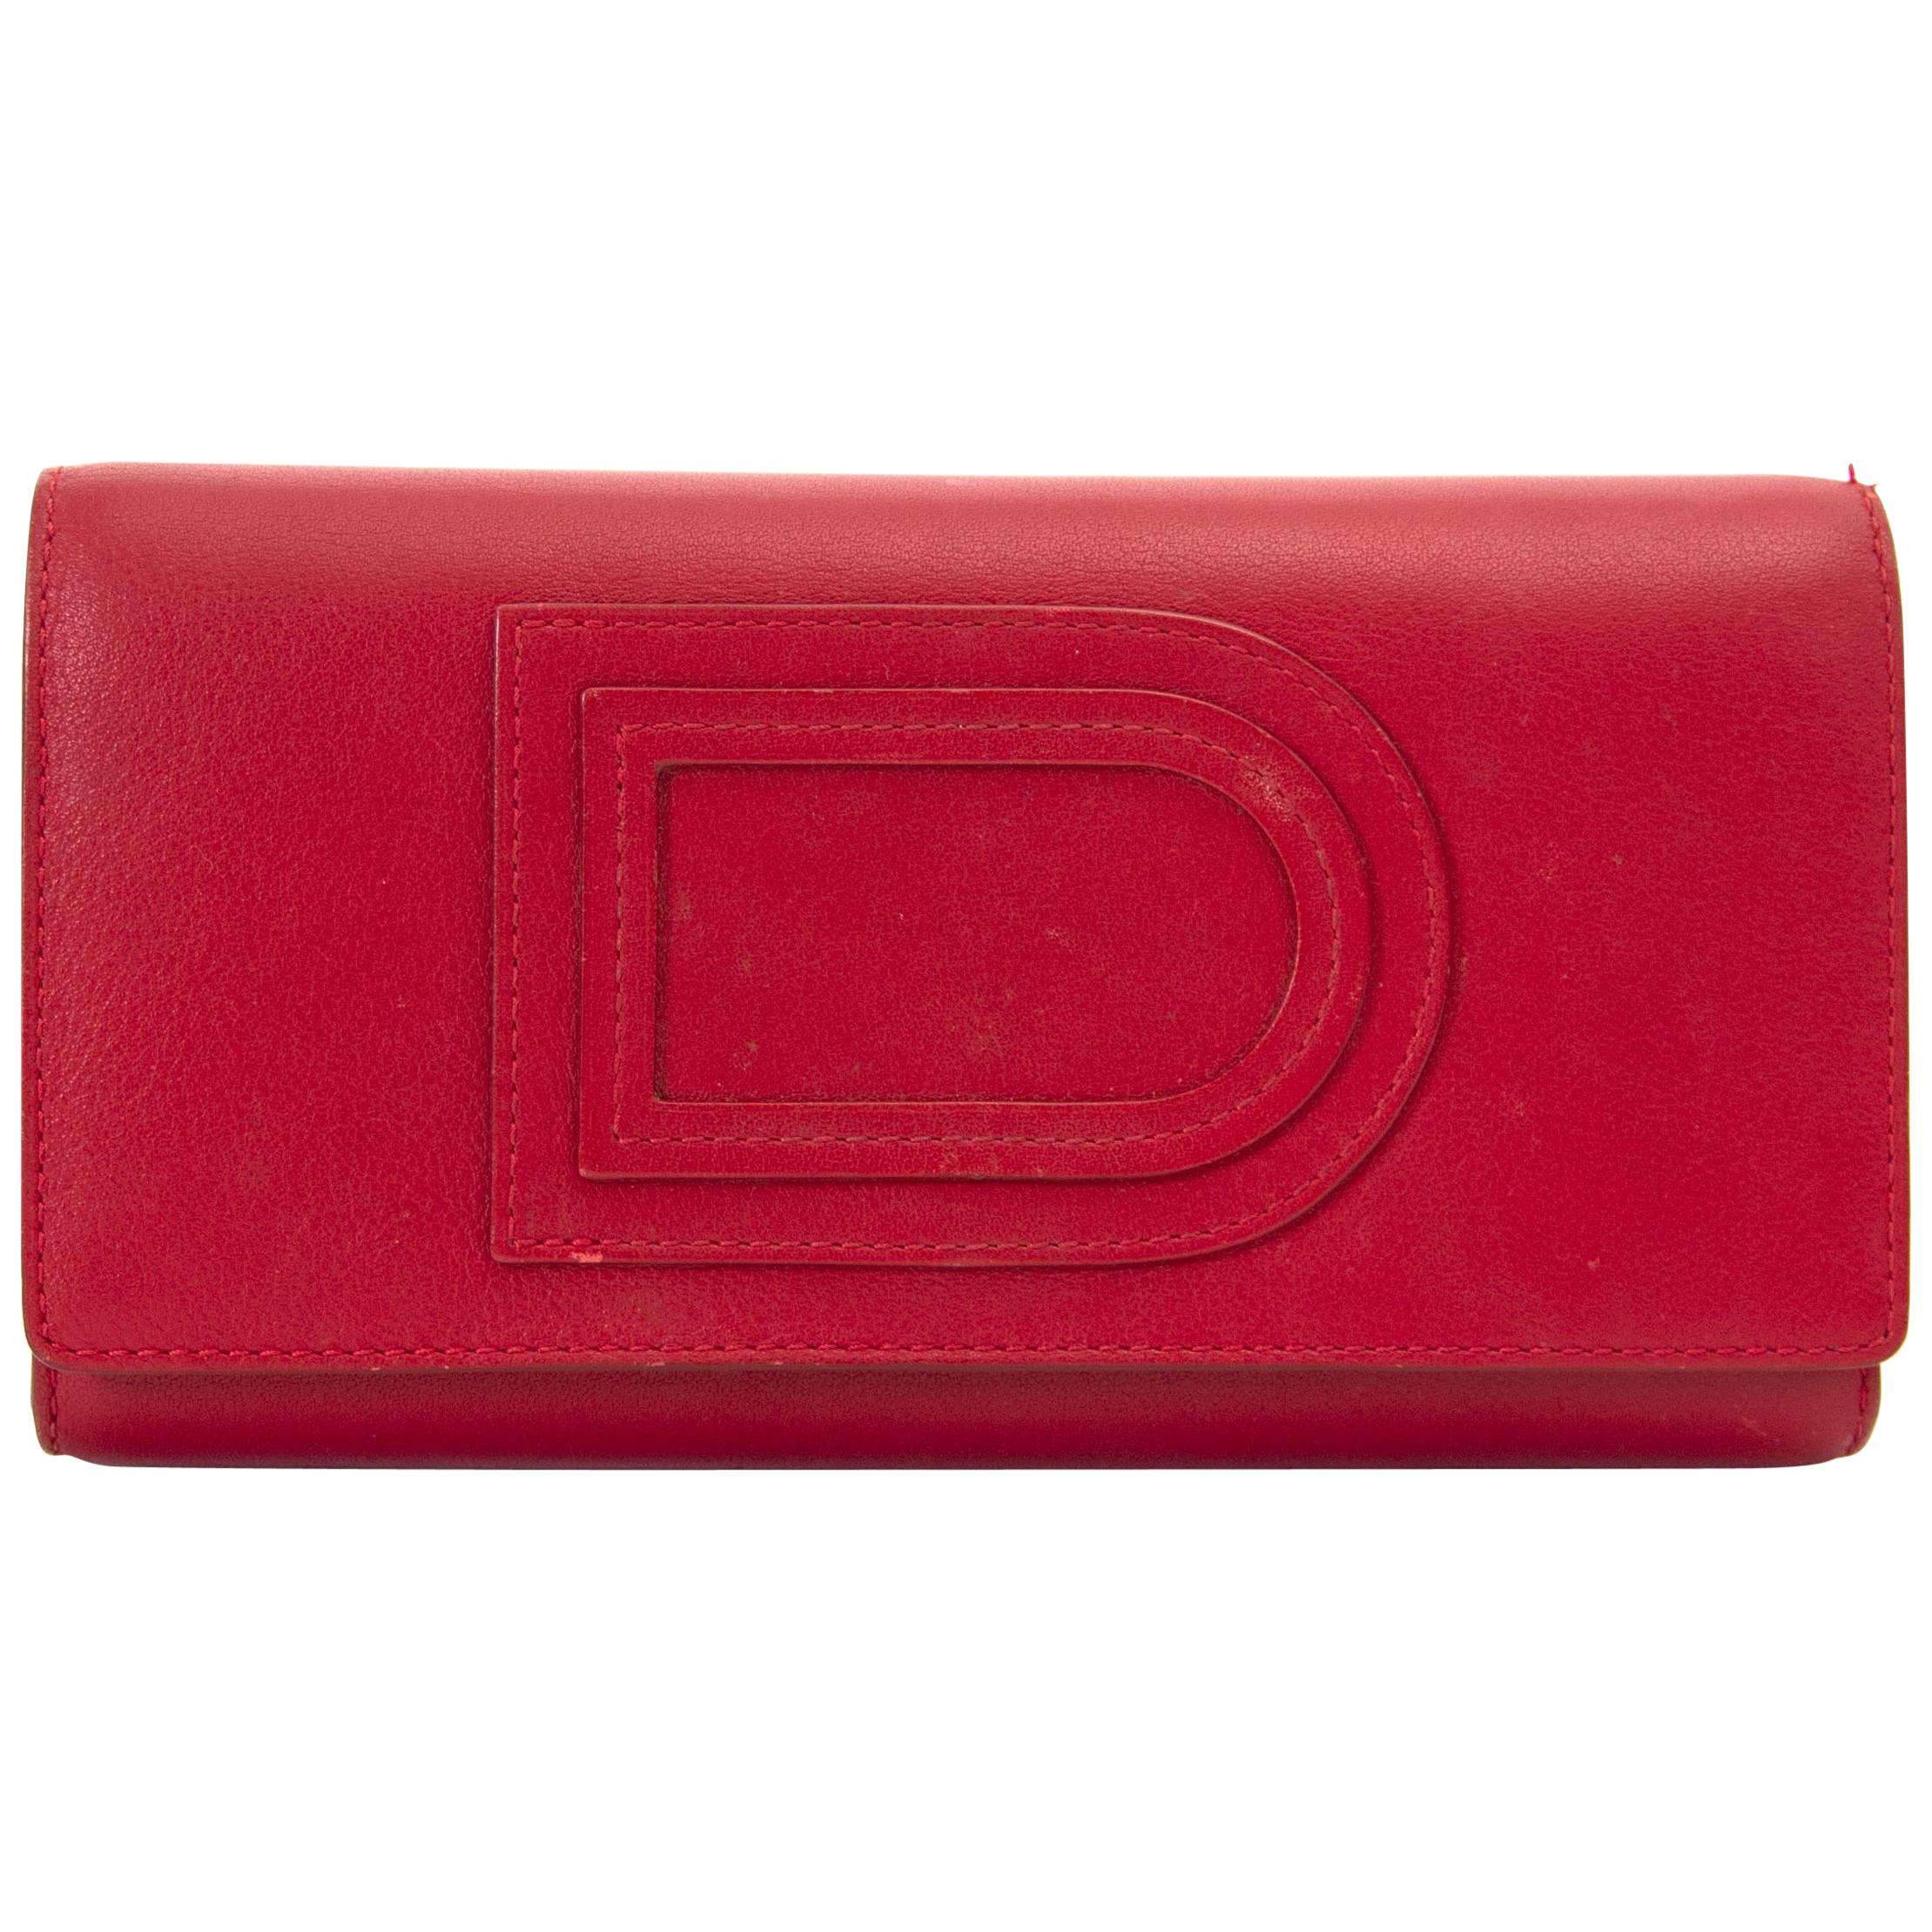 Delvaux Lipstck Red Trifold Wallet 